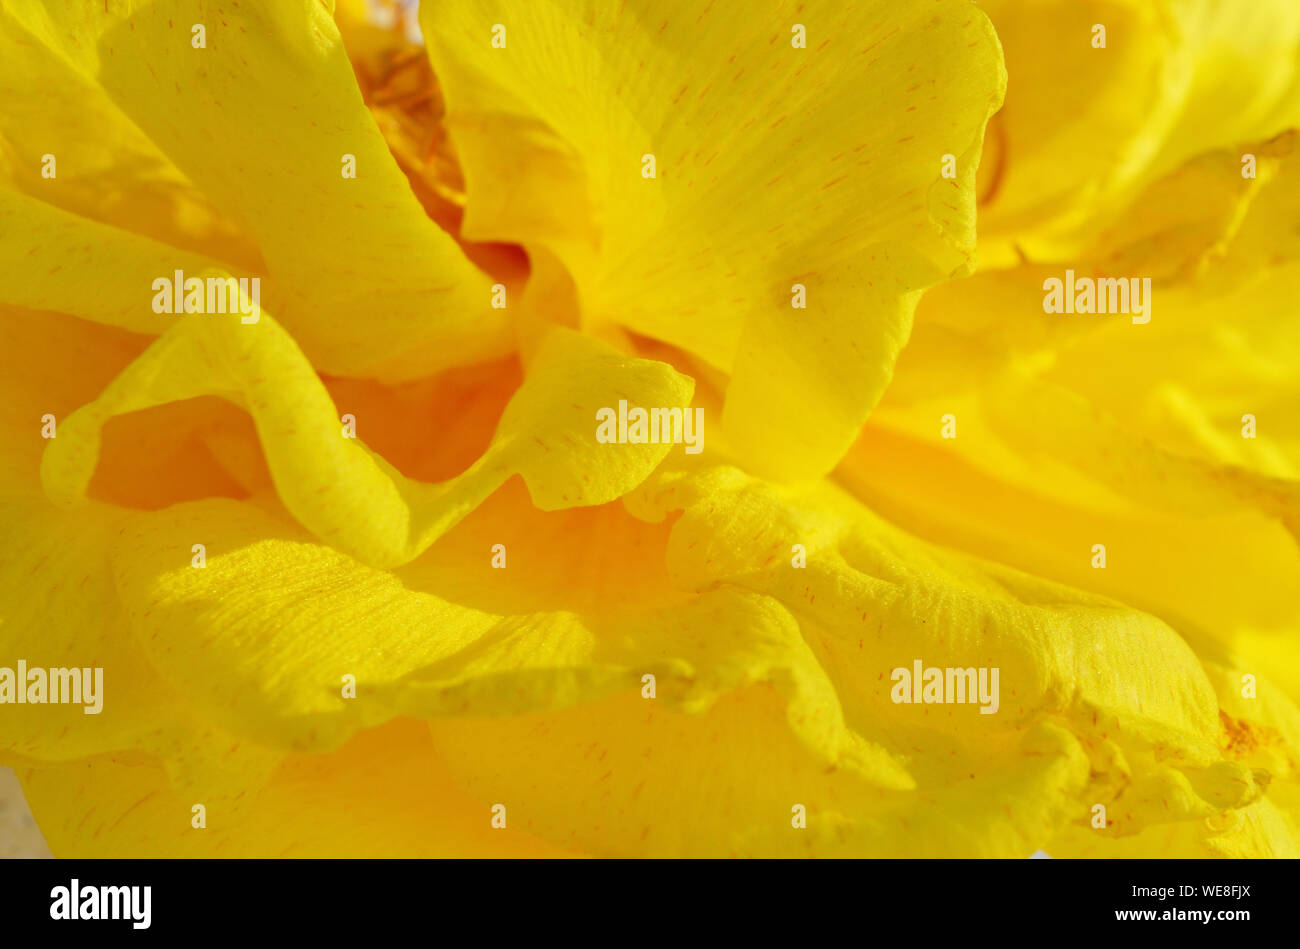 Abstract background and texture from soft overlap of flower petals, Orange color blur pattern on yellow surface Stock Photo